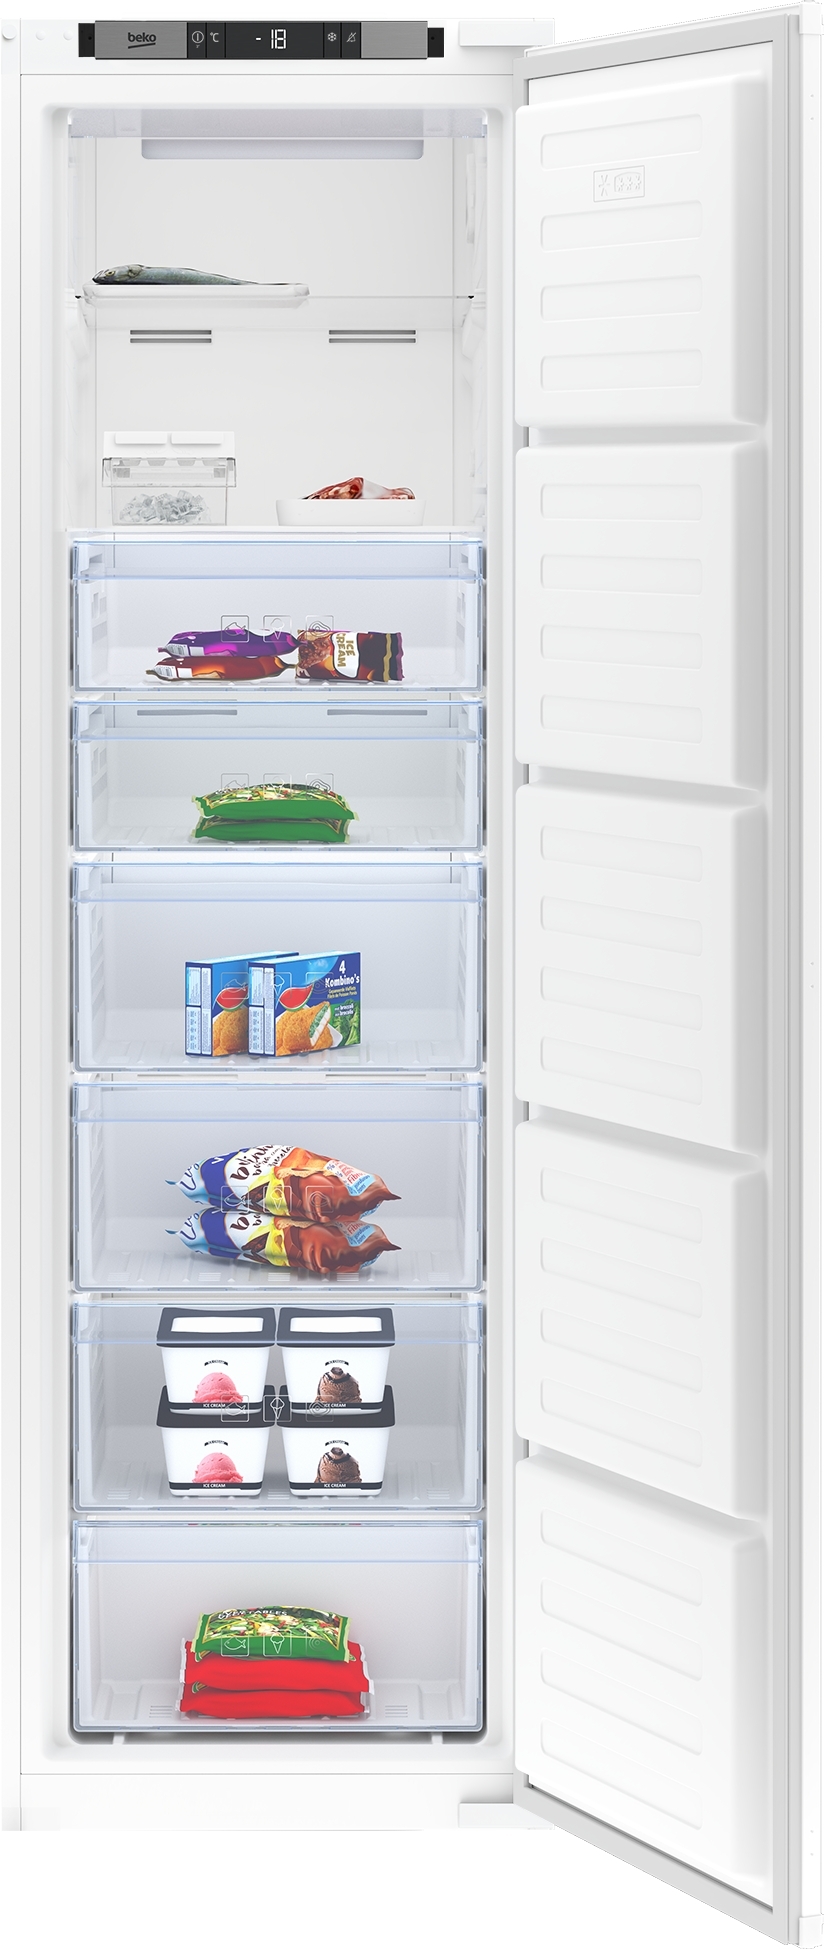 Beko BFFD3577 Integrated Tall Frost Free Freezer